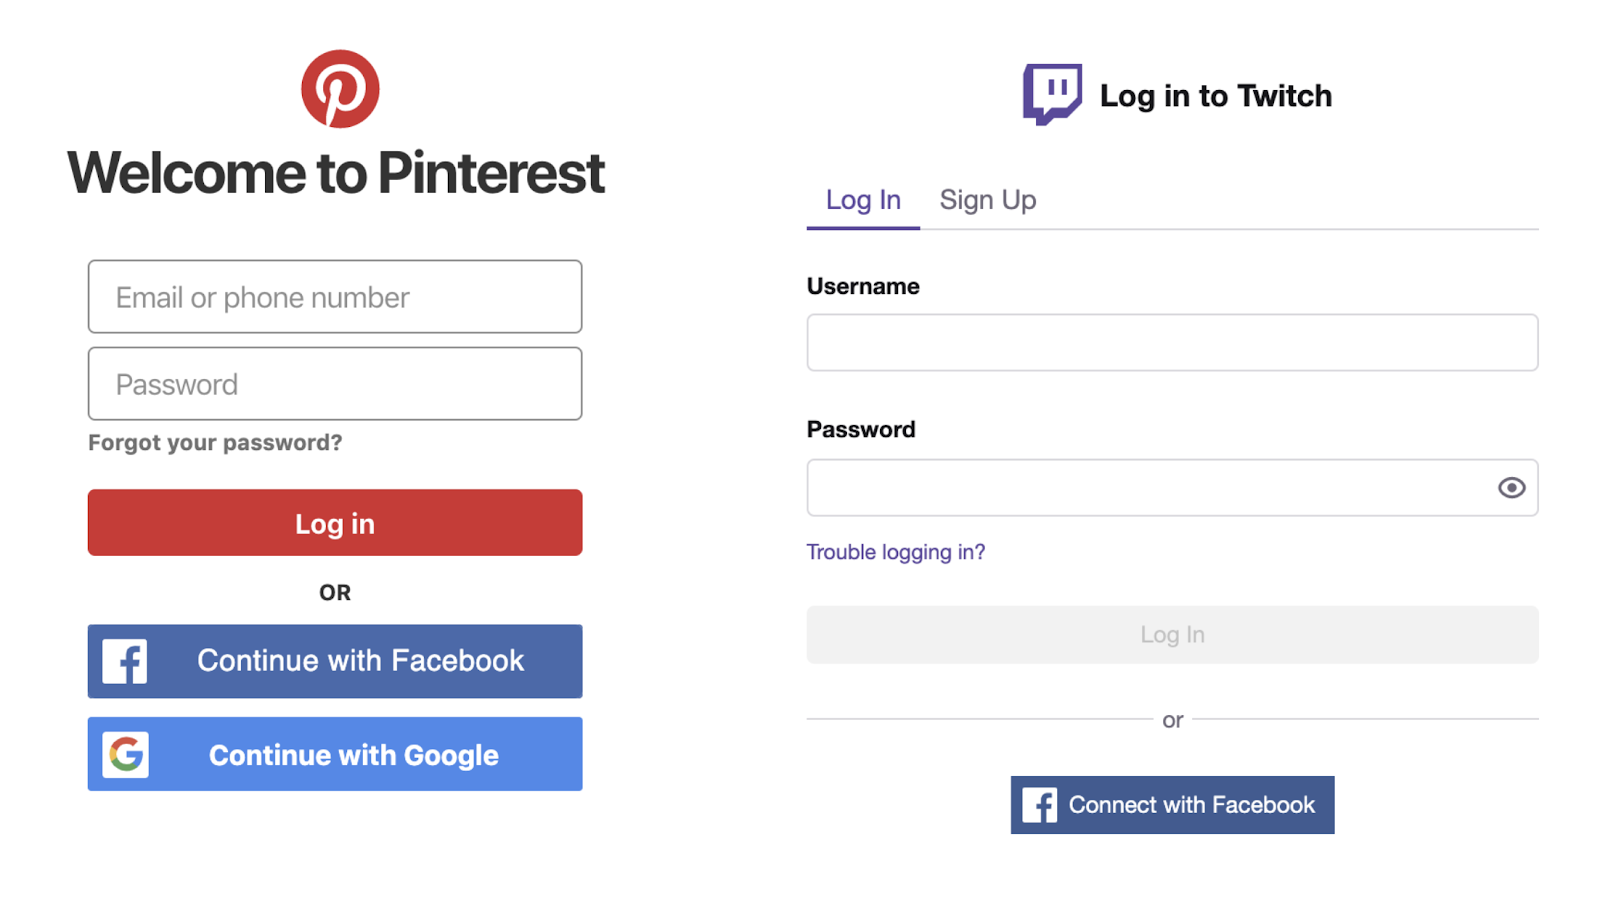 pinterest and twitch login with social login button options